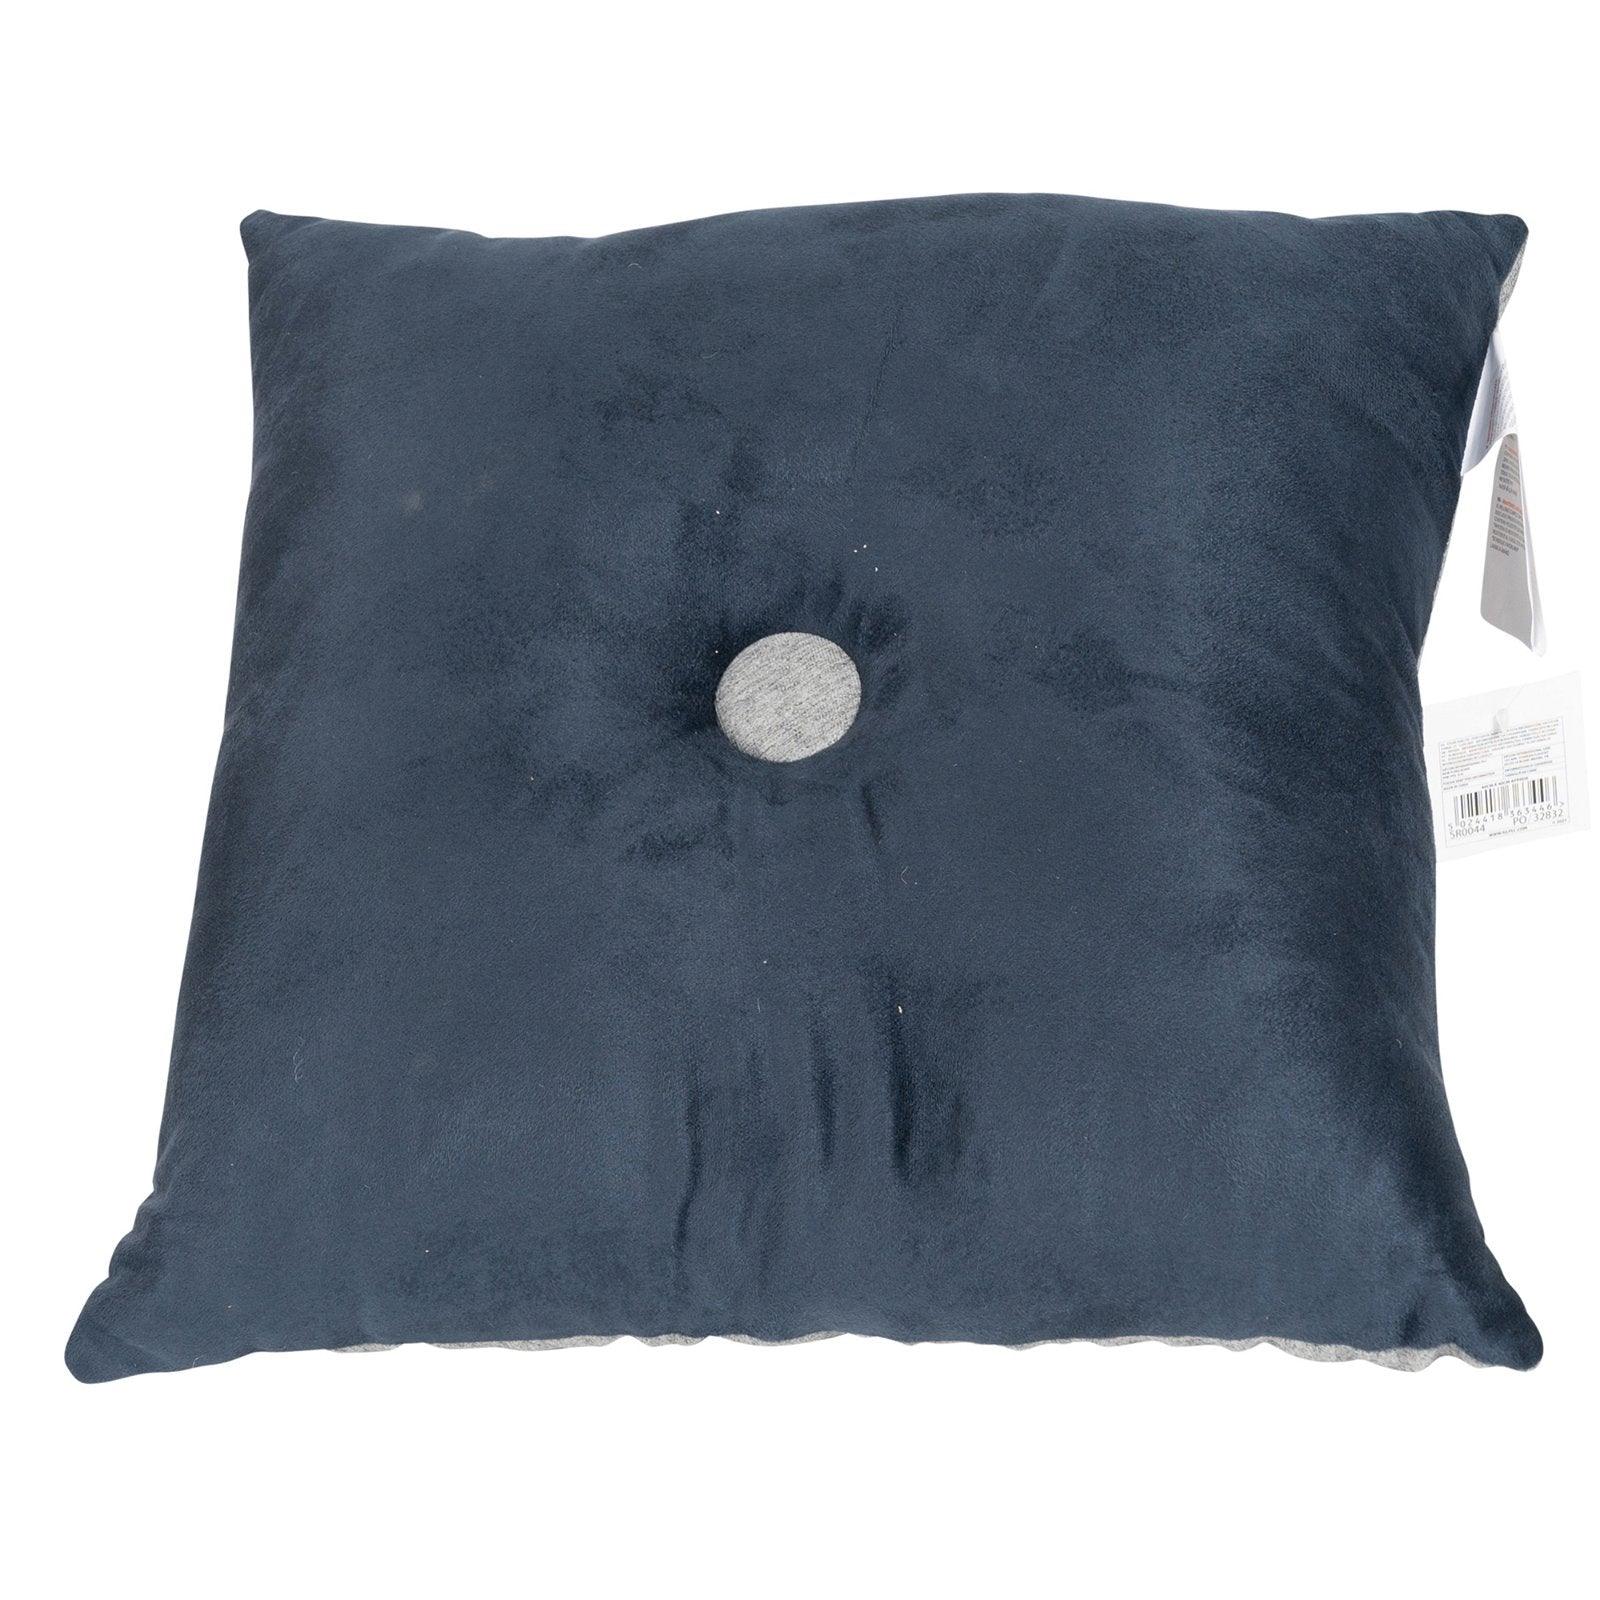 View Double Sided Square Scatter Cushion Dark Blue 36cm information